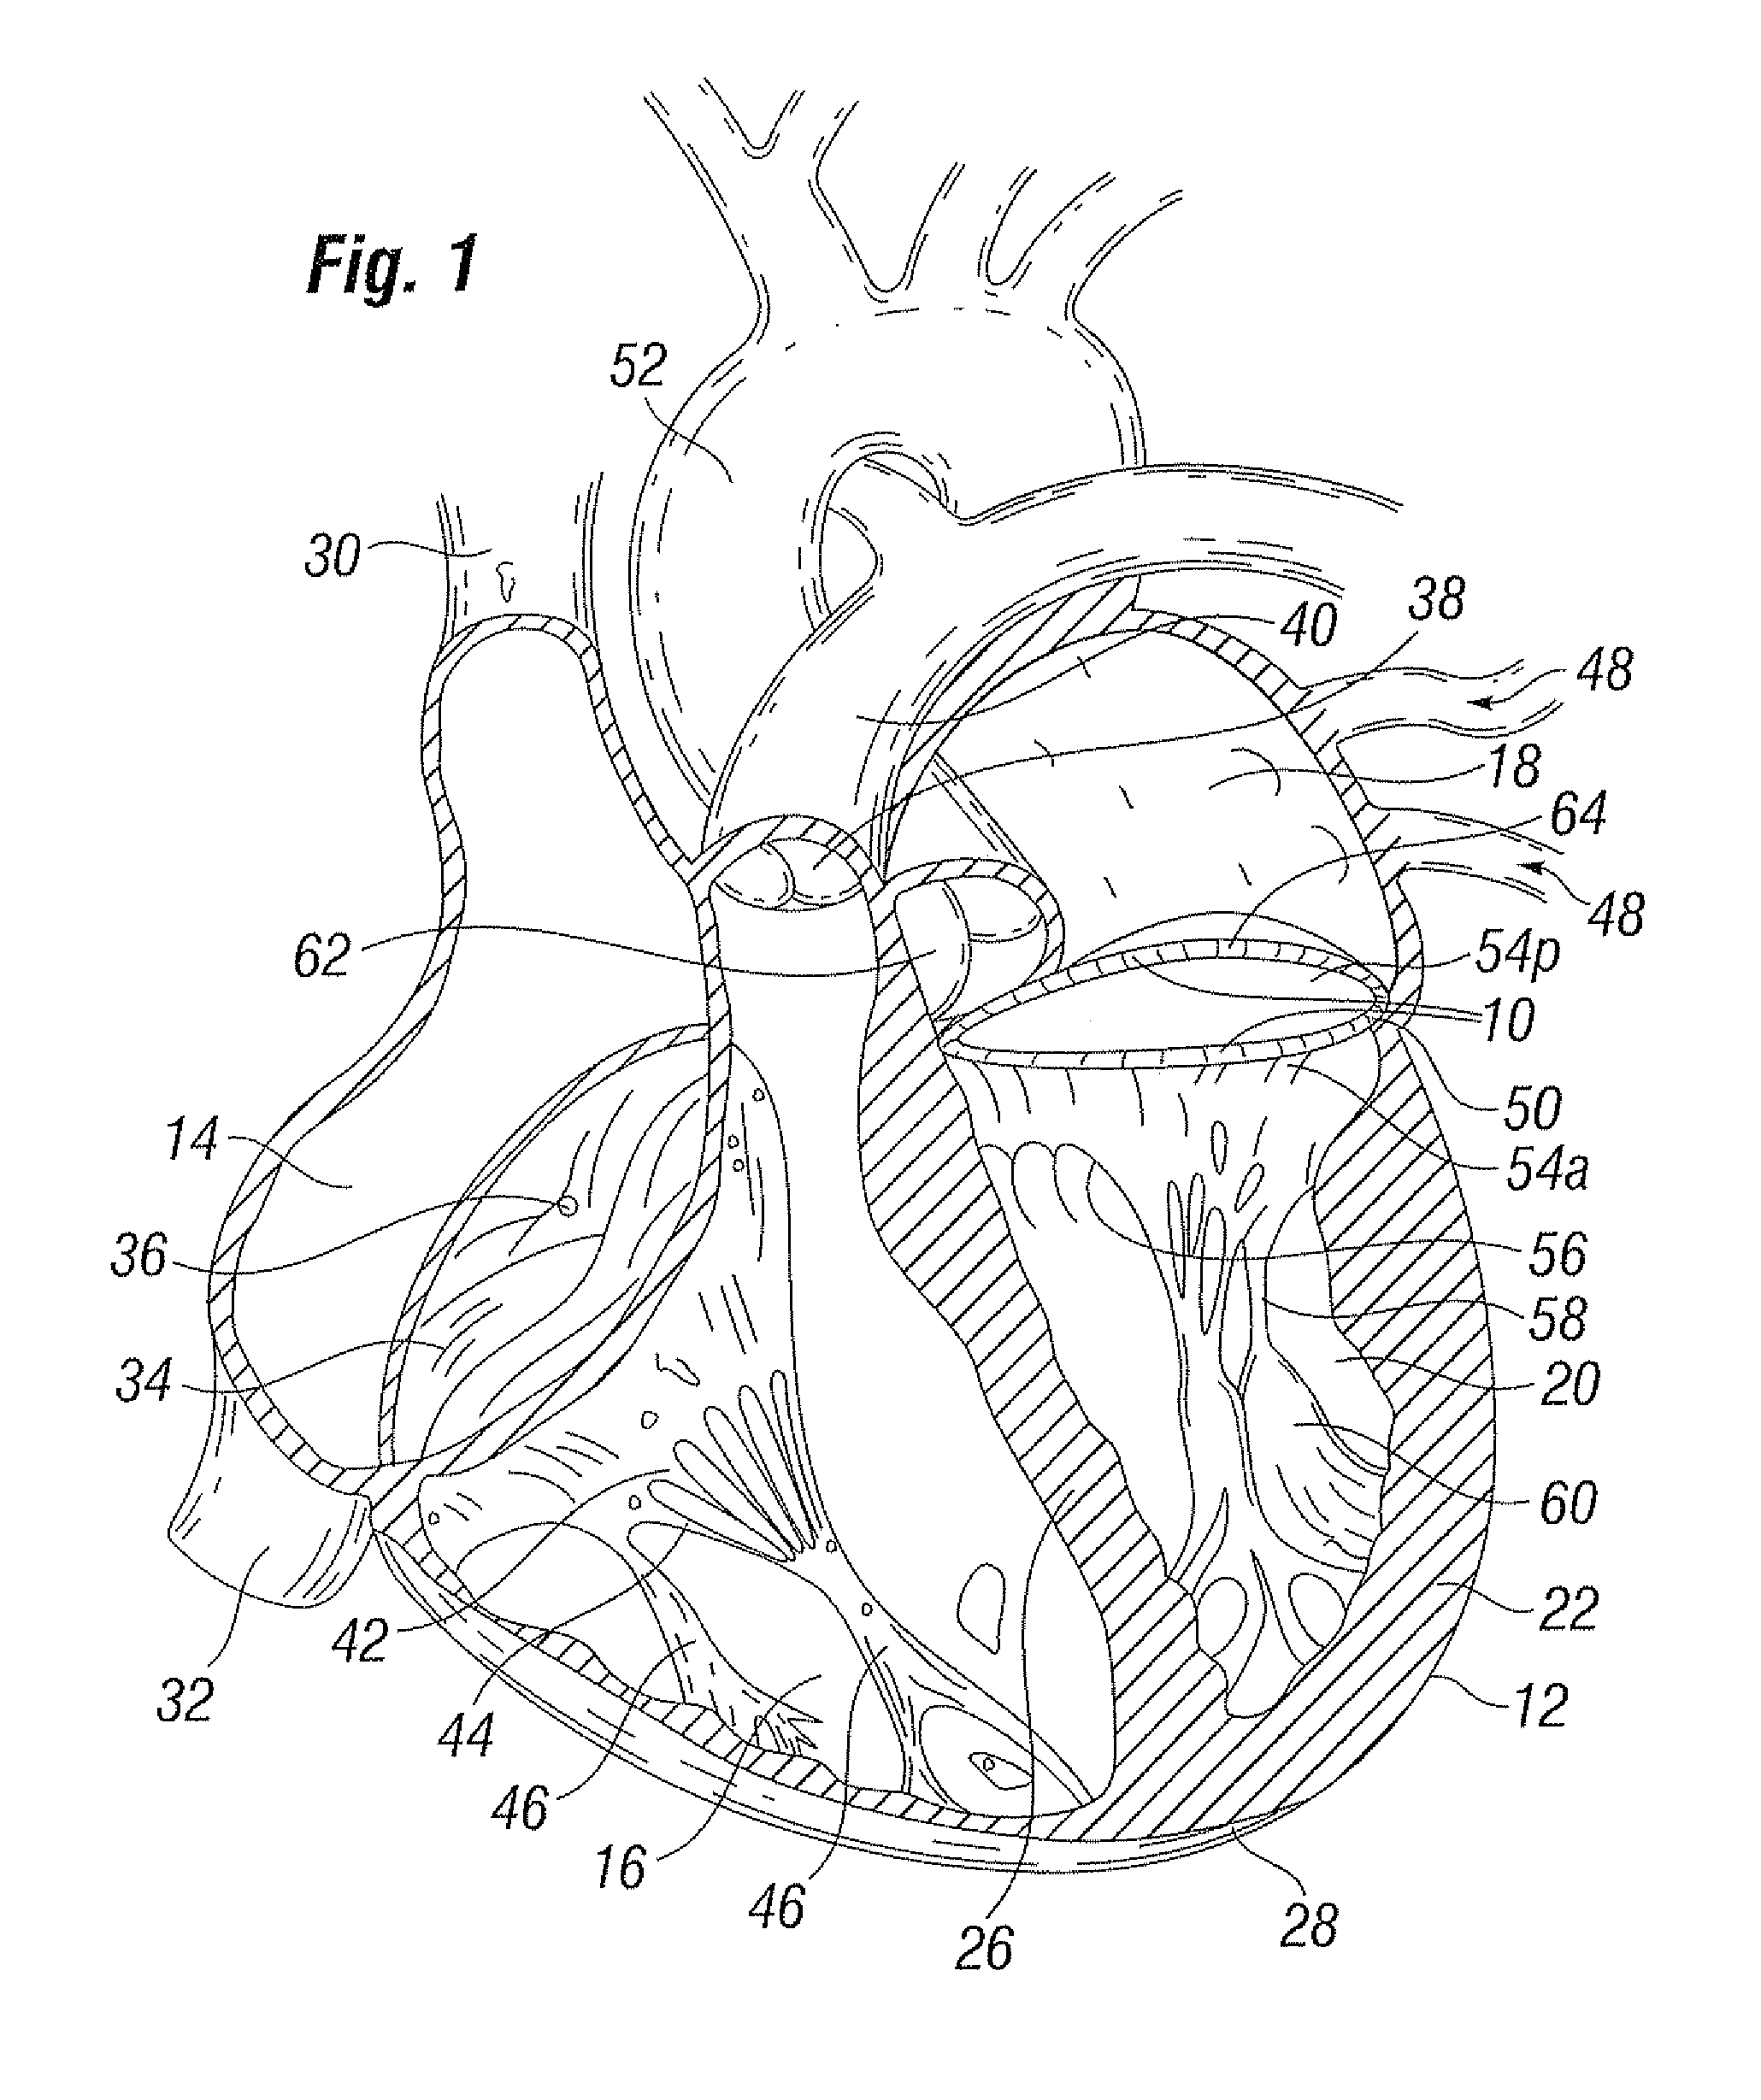 Transformable annuloplasty ring configured to receive a percutaneous prosthetic heart valve implantation